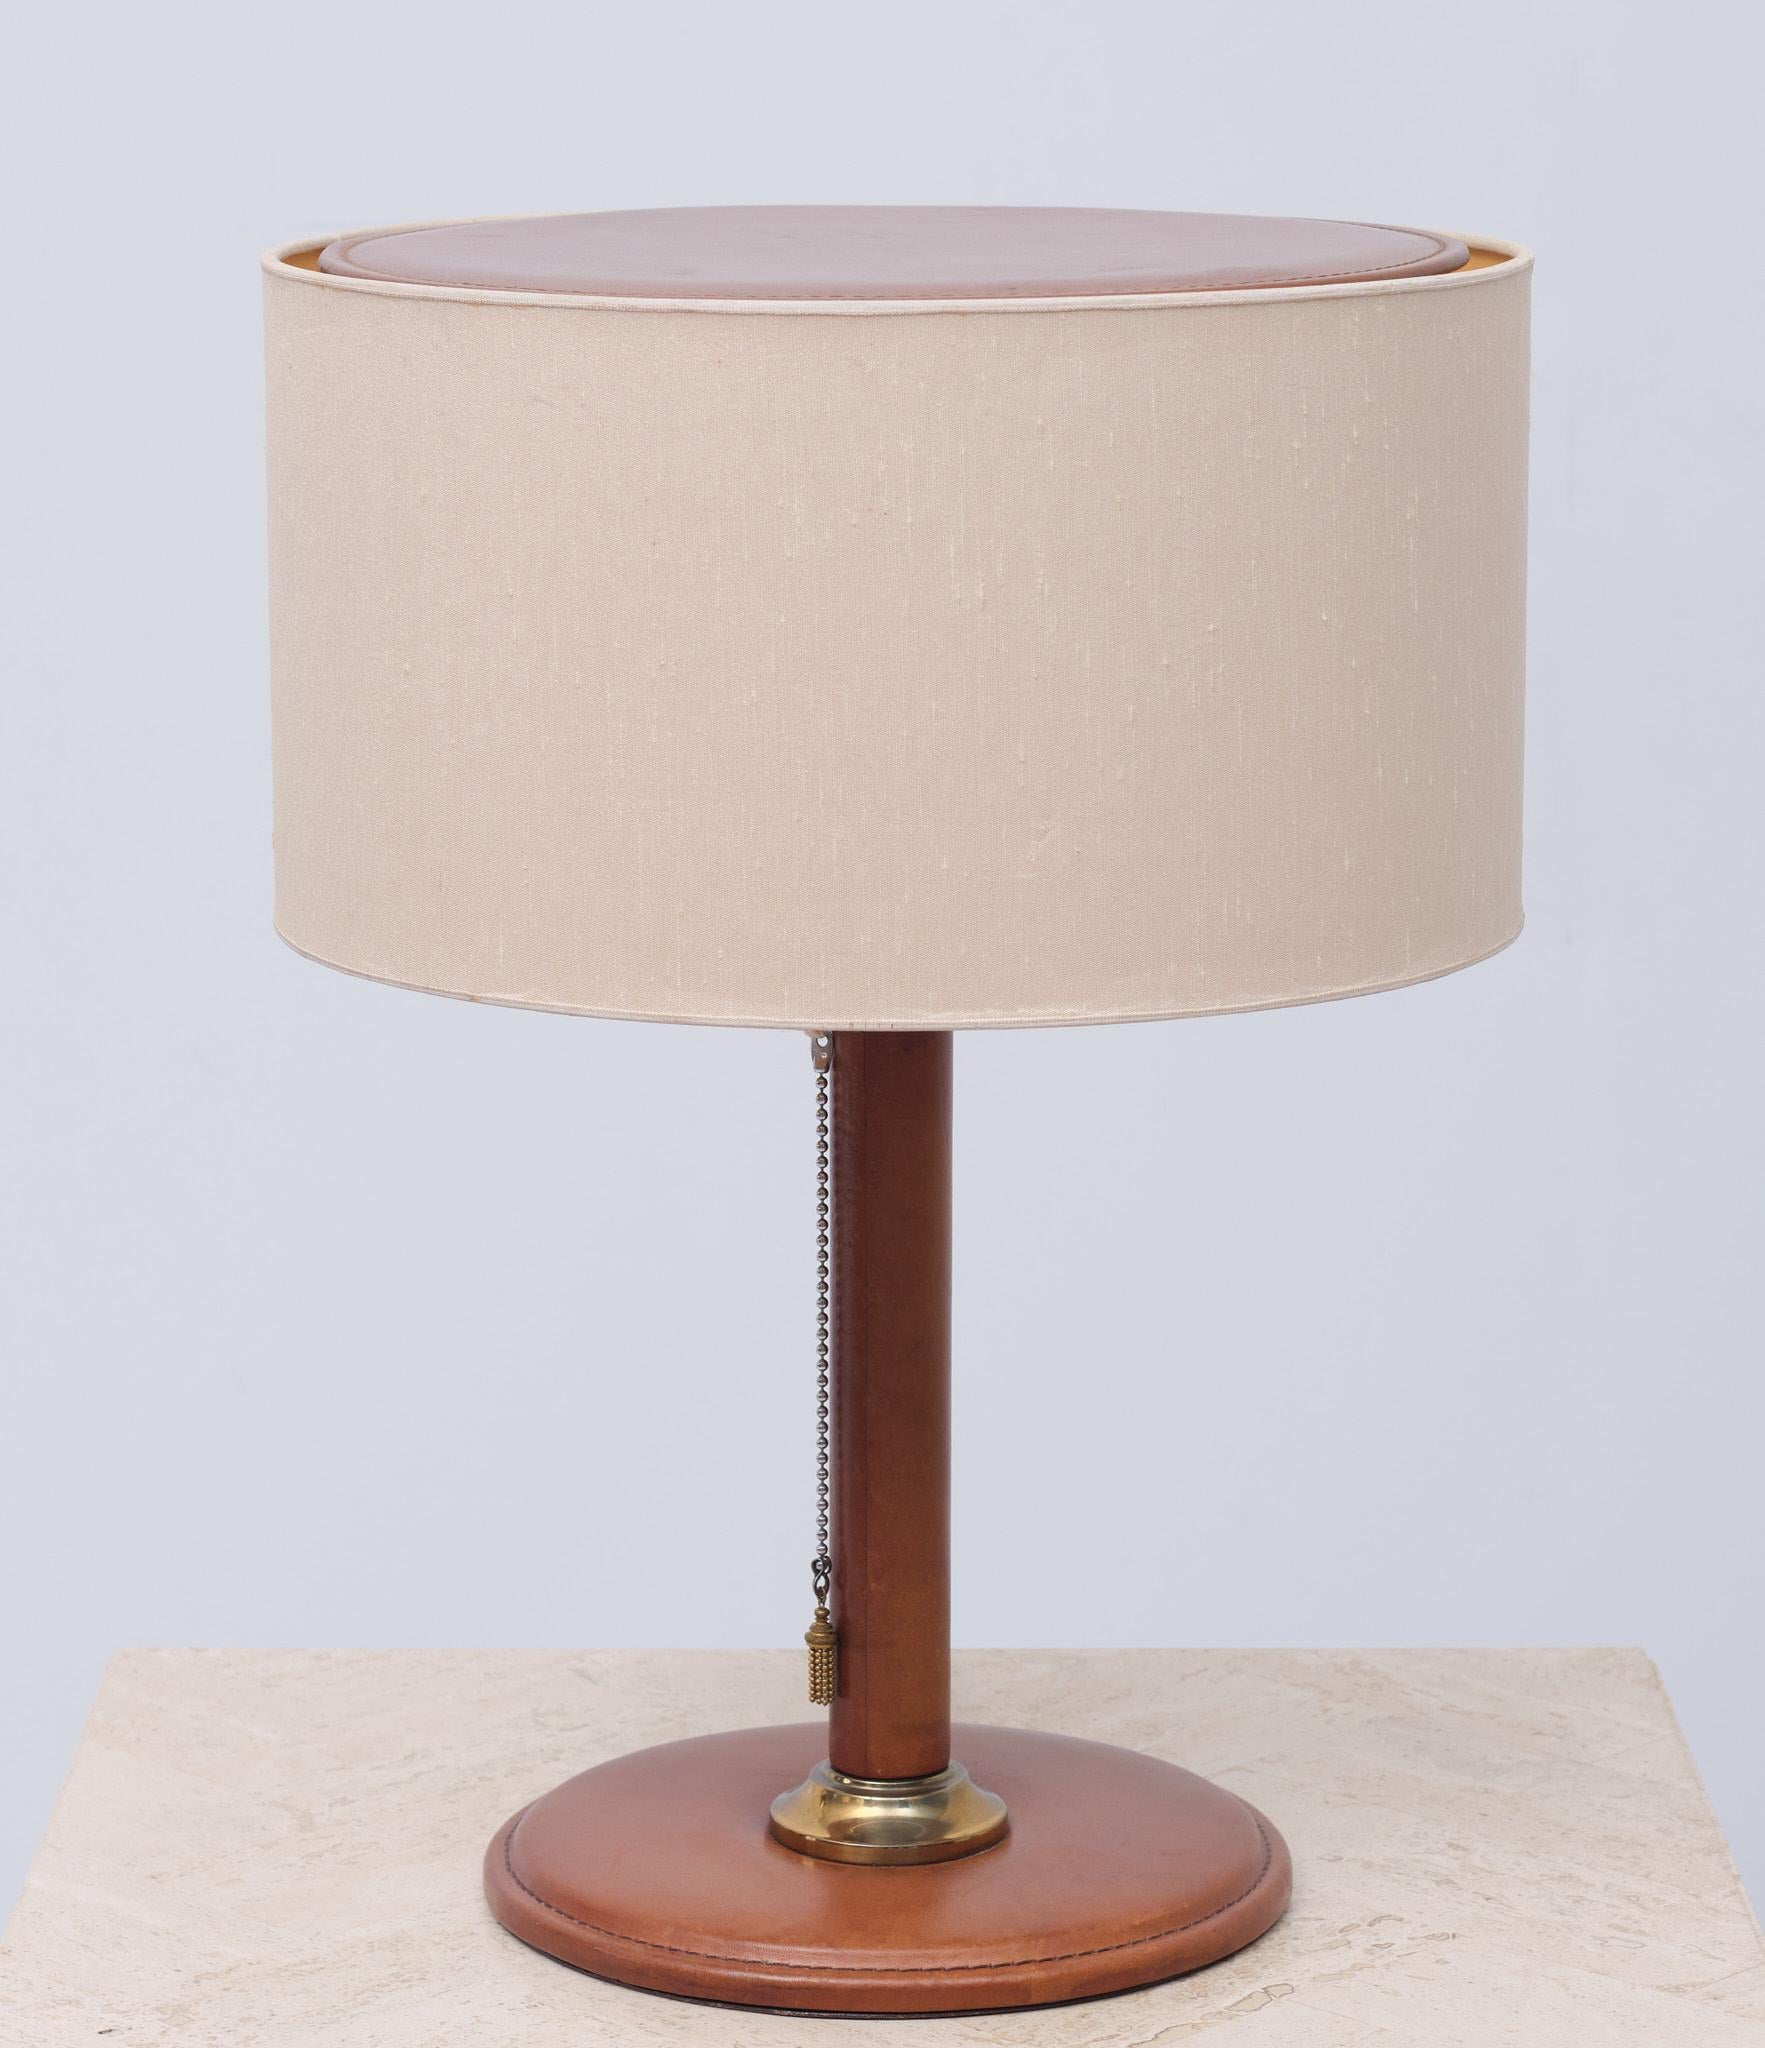 Very nice Stich Leather table lamp. Warm Cognac color, original Linen shade.
Creme color. 1 Large E27 bulb. Pull down switch. Like this model with the Leather lid on top of the shade. Good condition.
 